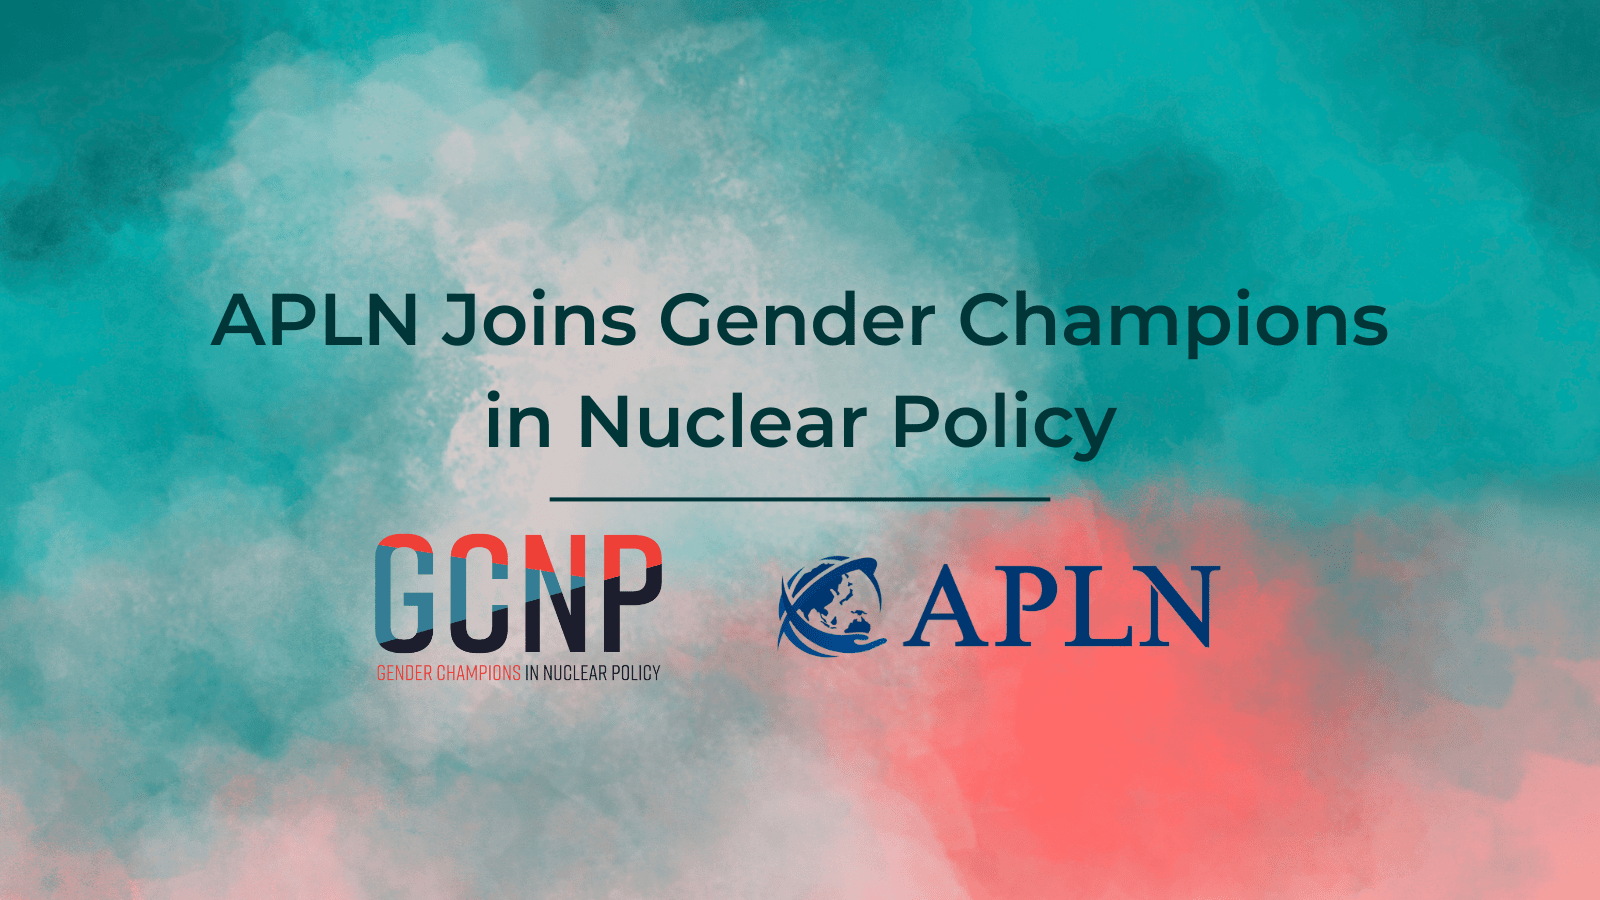 APLN Joins Gender Champions in Nuclear Policy